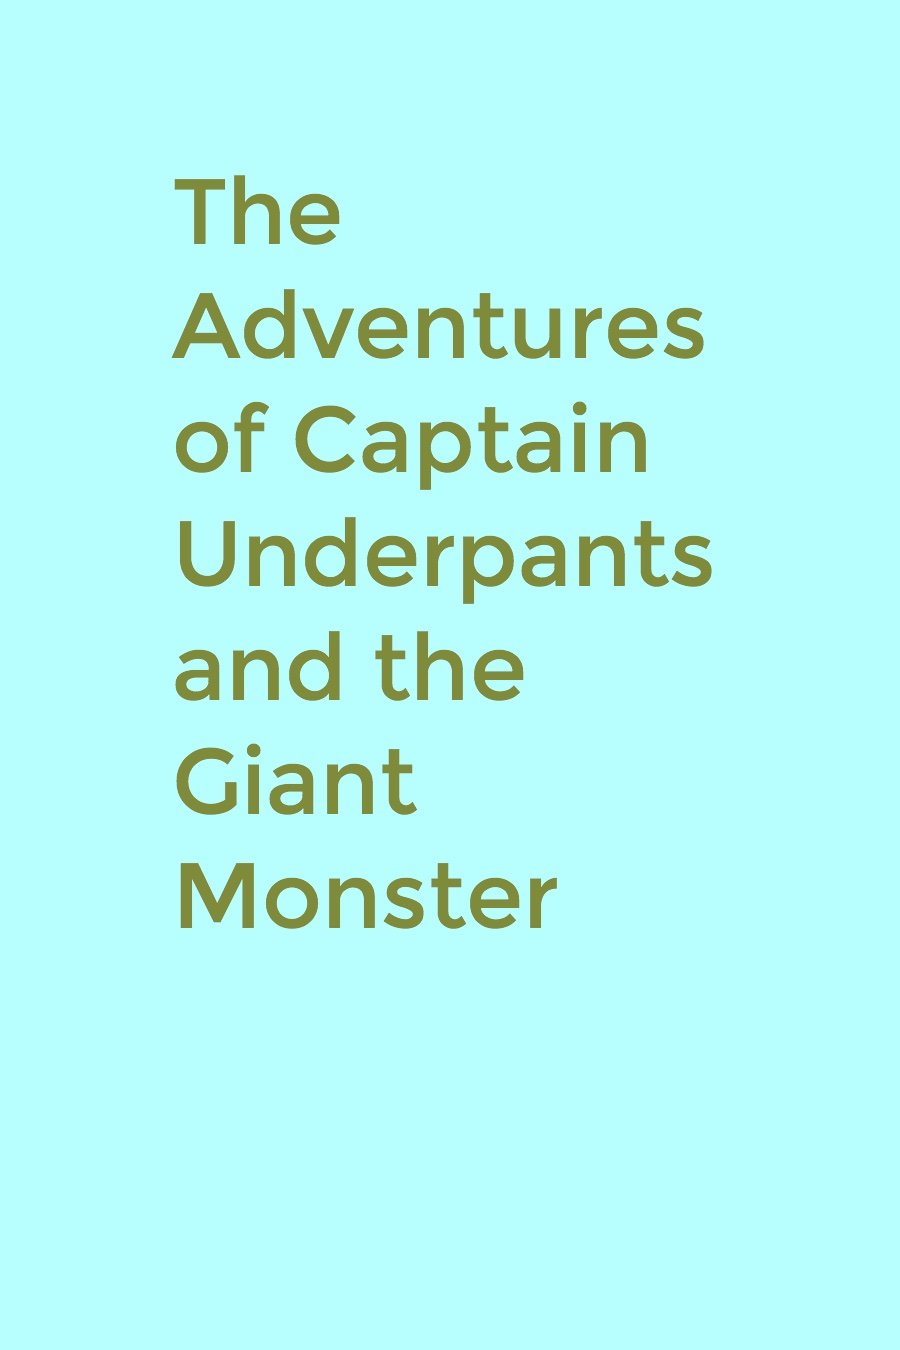 The Adventures of Captain Underpants and the Giant Monster by Ethan T